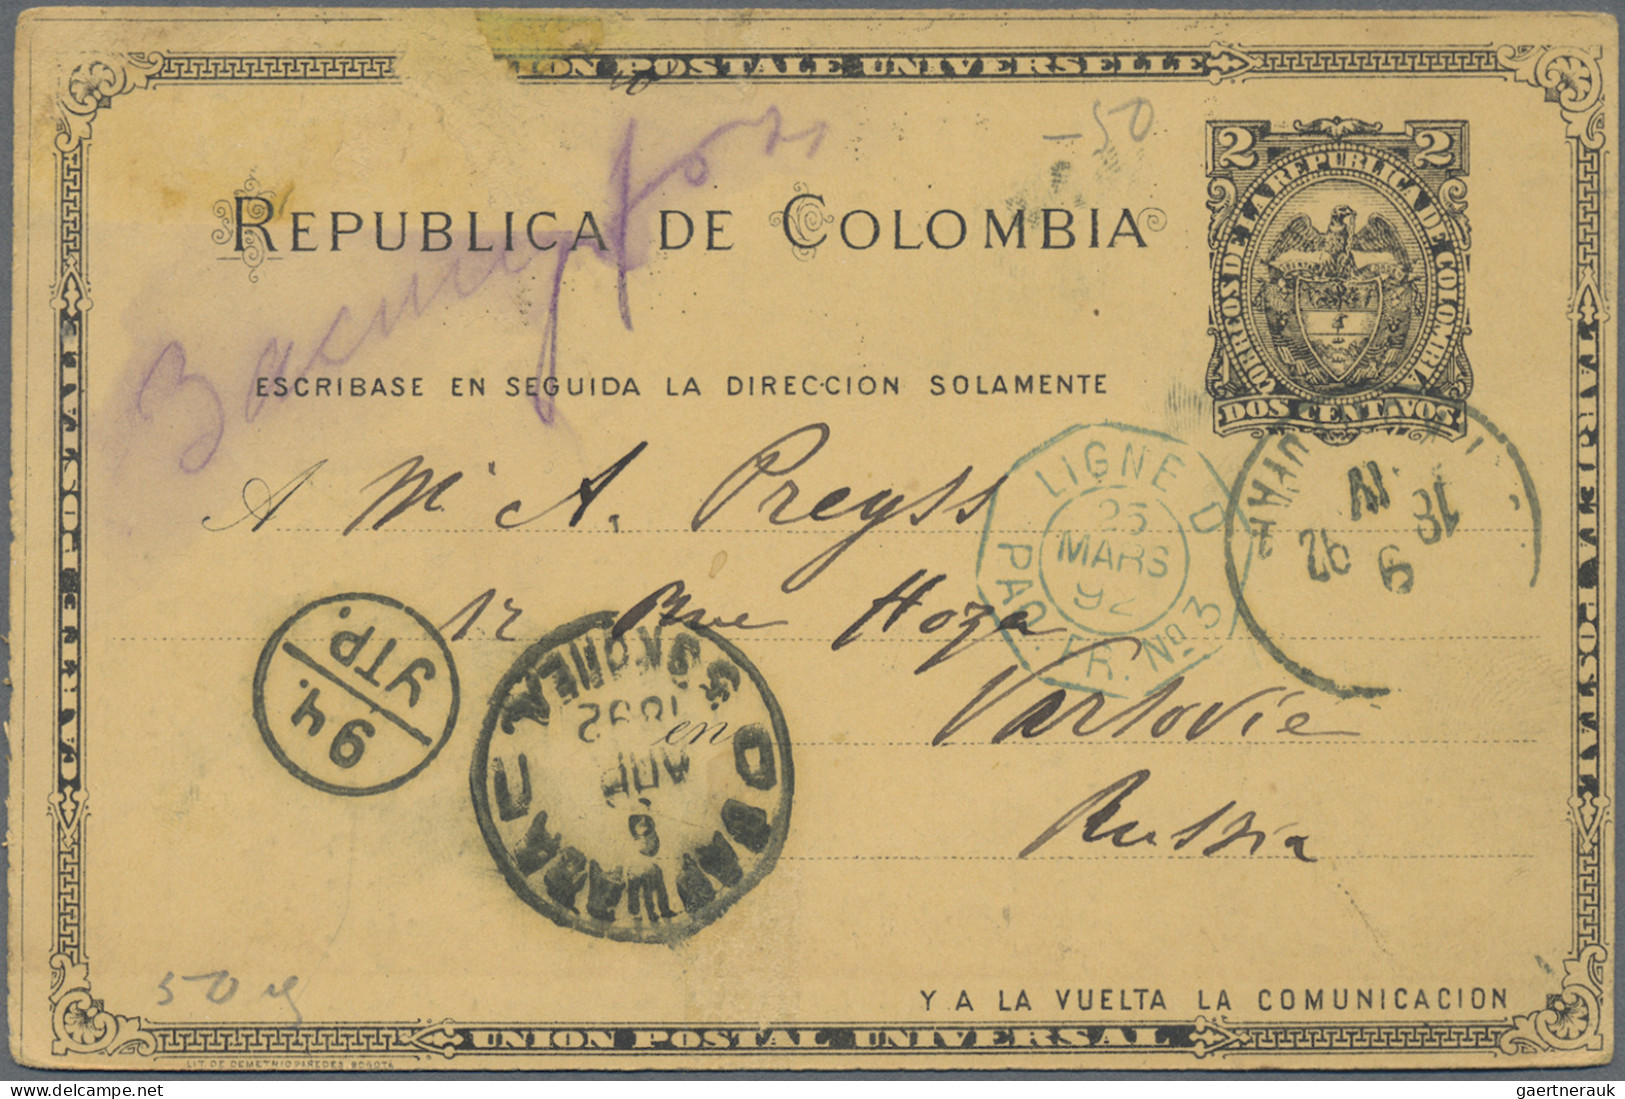 Central and South America: 1890/1990 (ca.), assortment of apprx. 560 covers/card